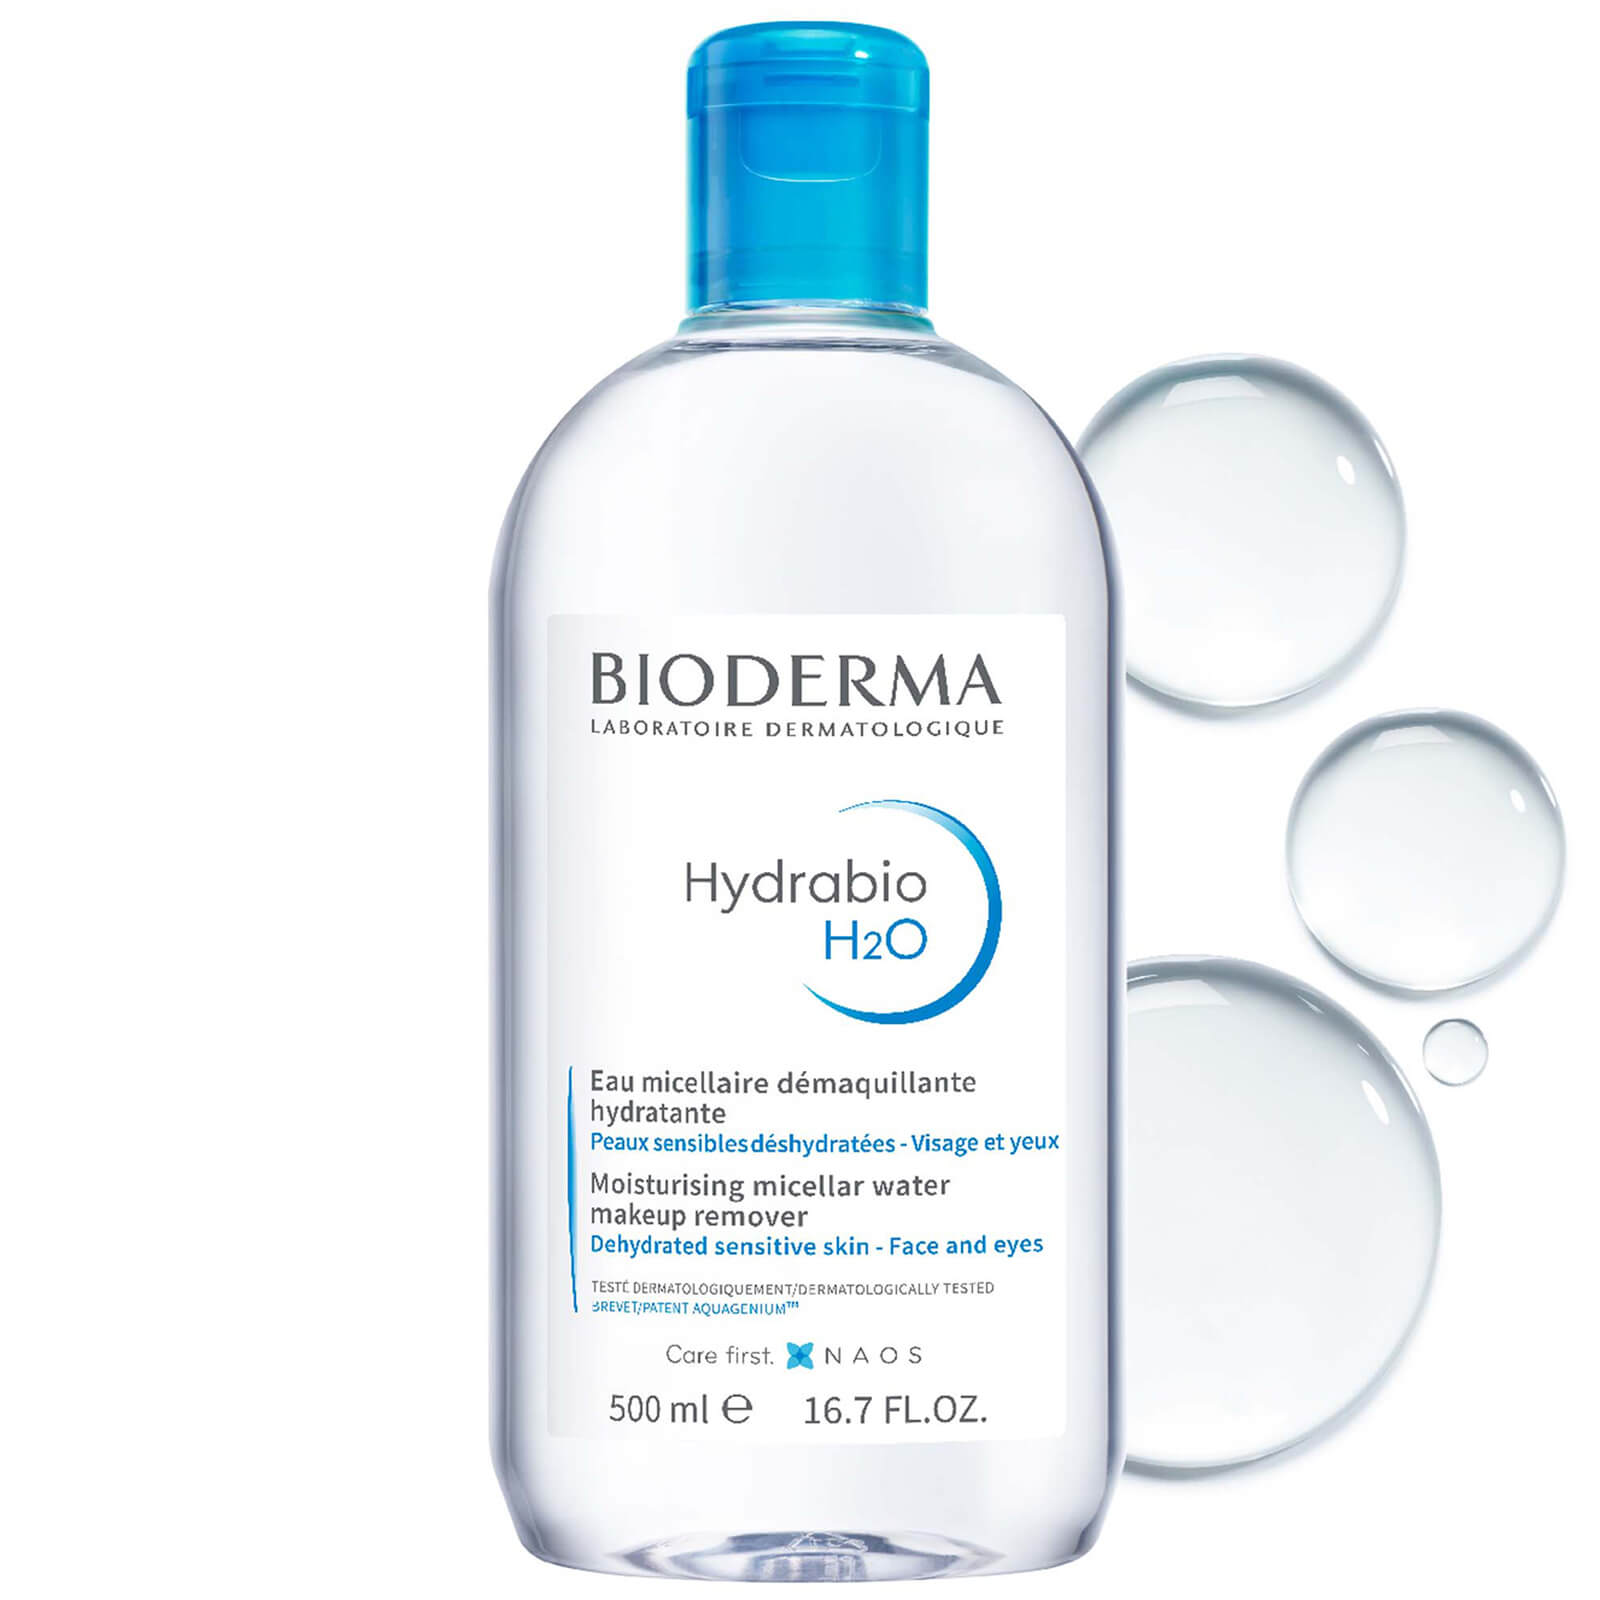 Photos - Facial / Body Cleansing Product Bioderma Hydrabio H20 Micellar Water 500ml 28381 